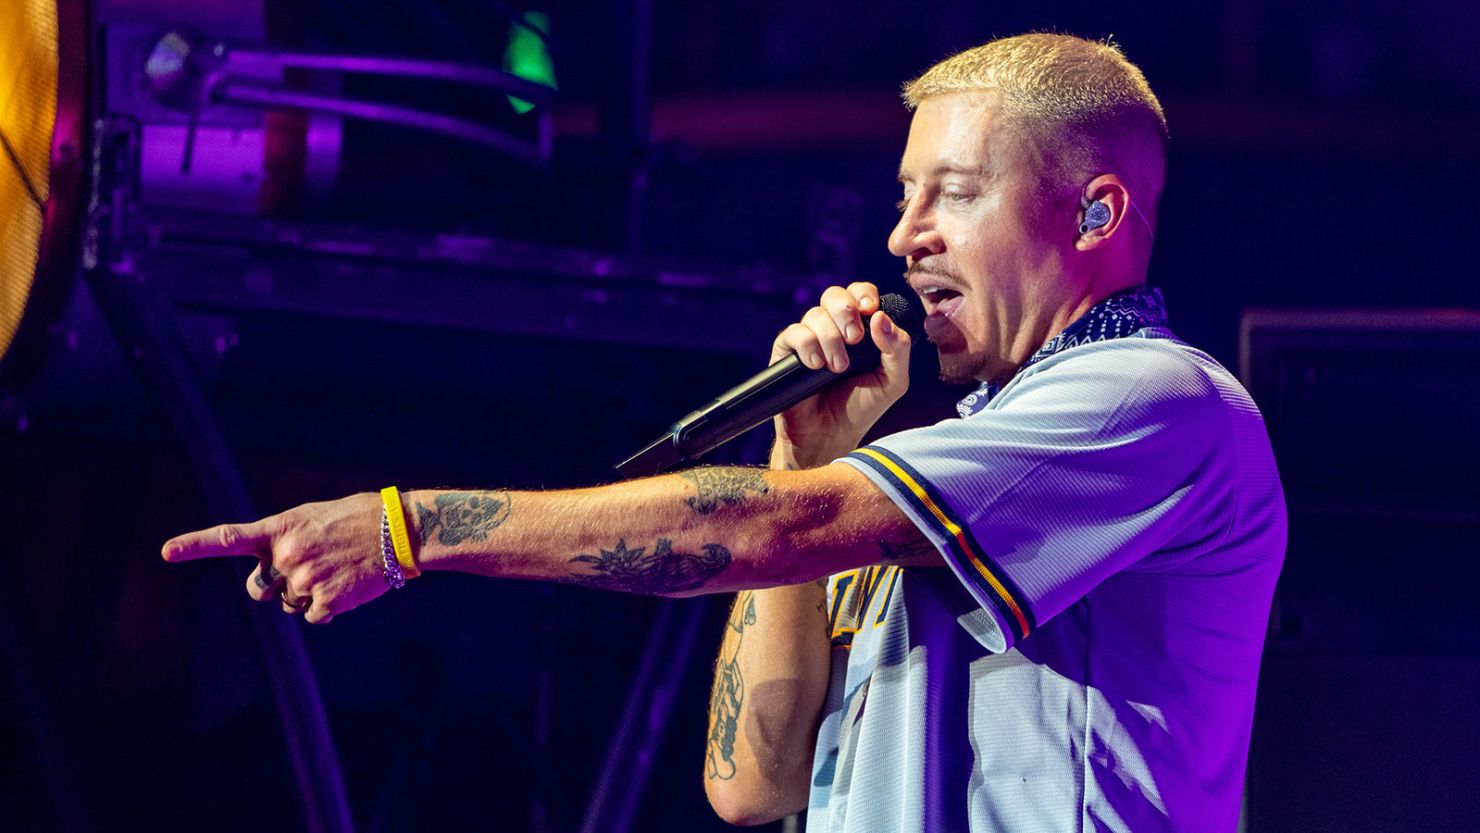 Rapper Macklemore performs during the "Ben Tour" in Wisconsin last year.